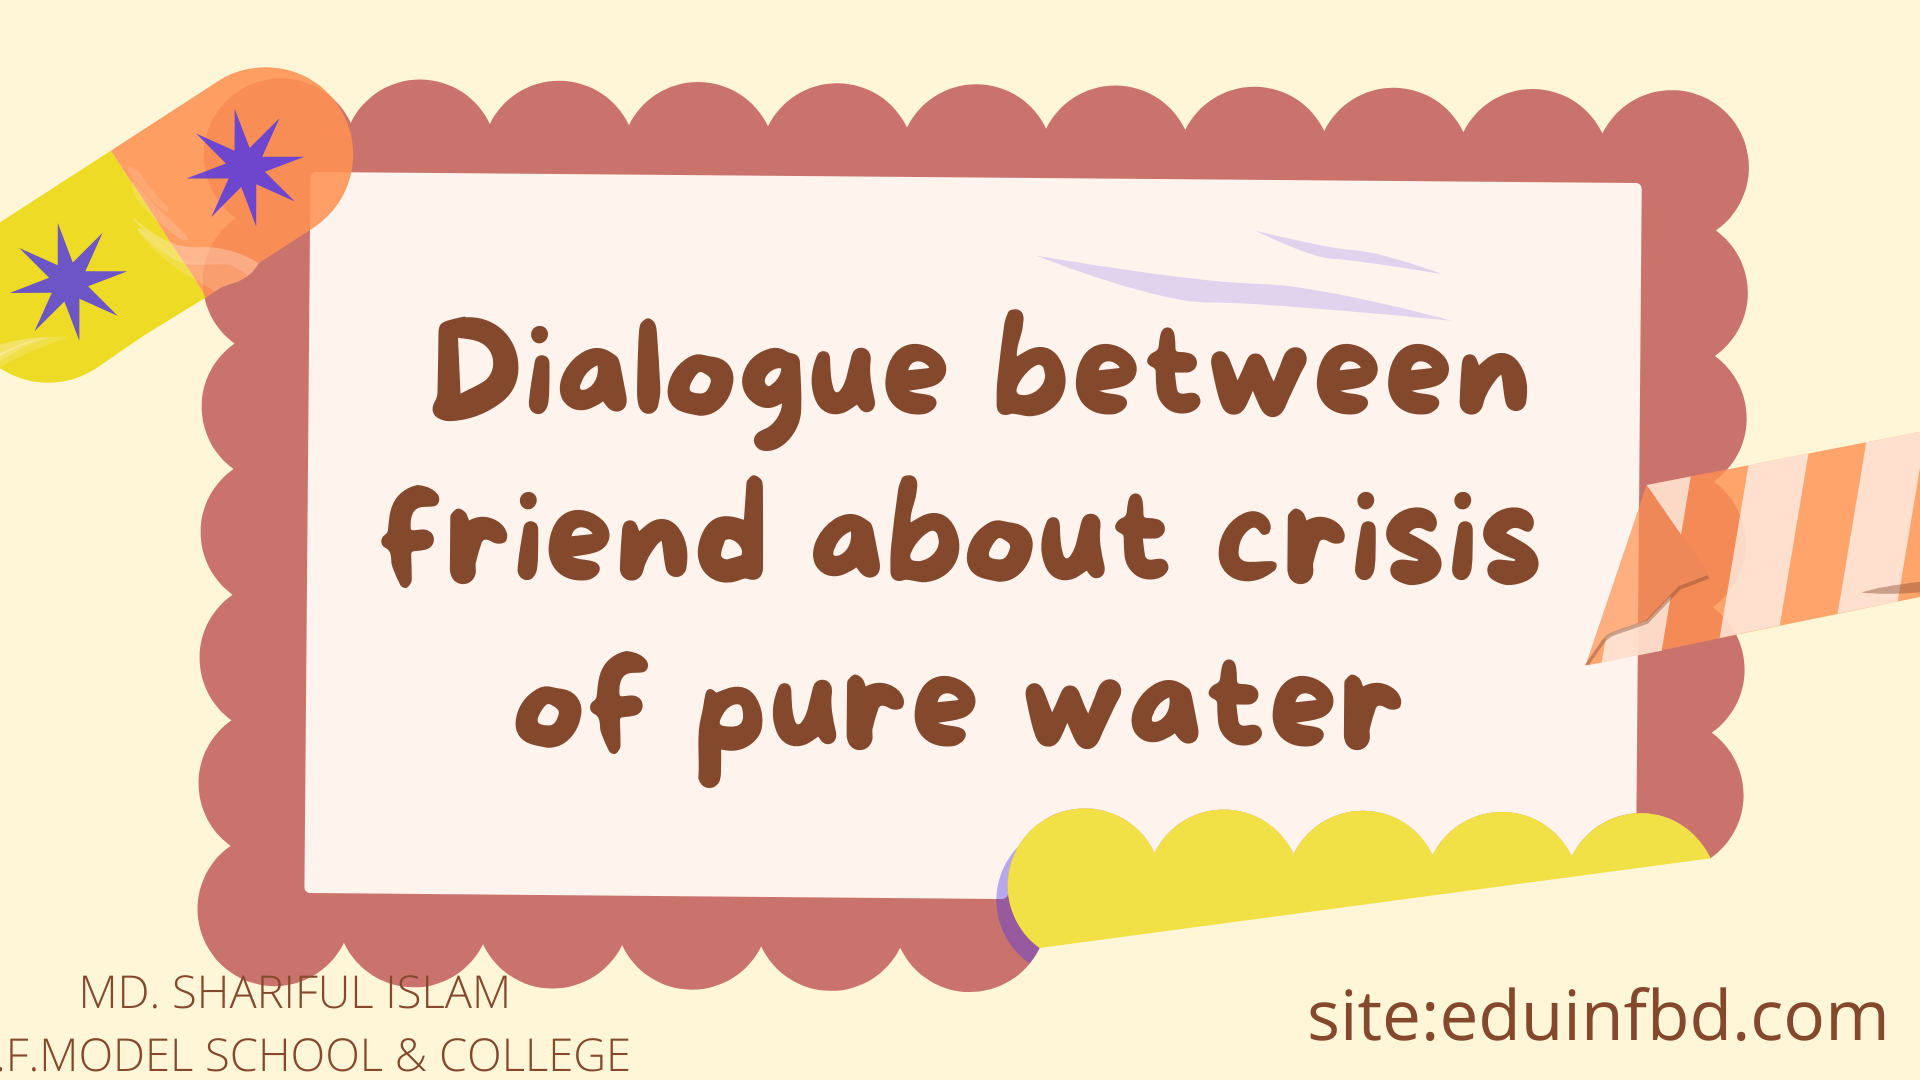 Dialogue between friend about crisis of pure water